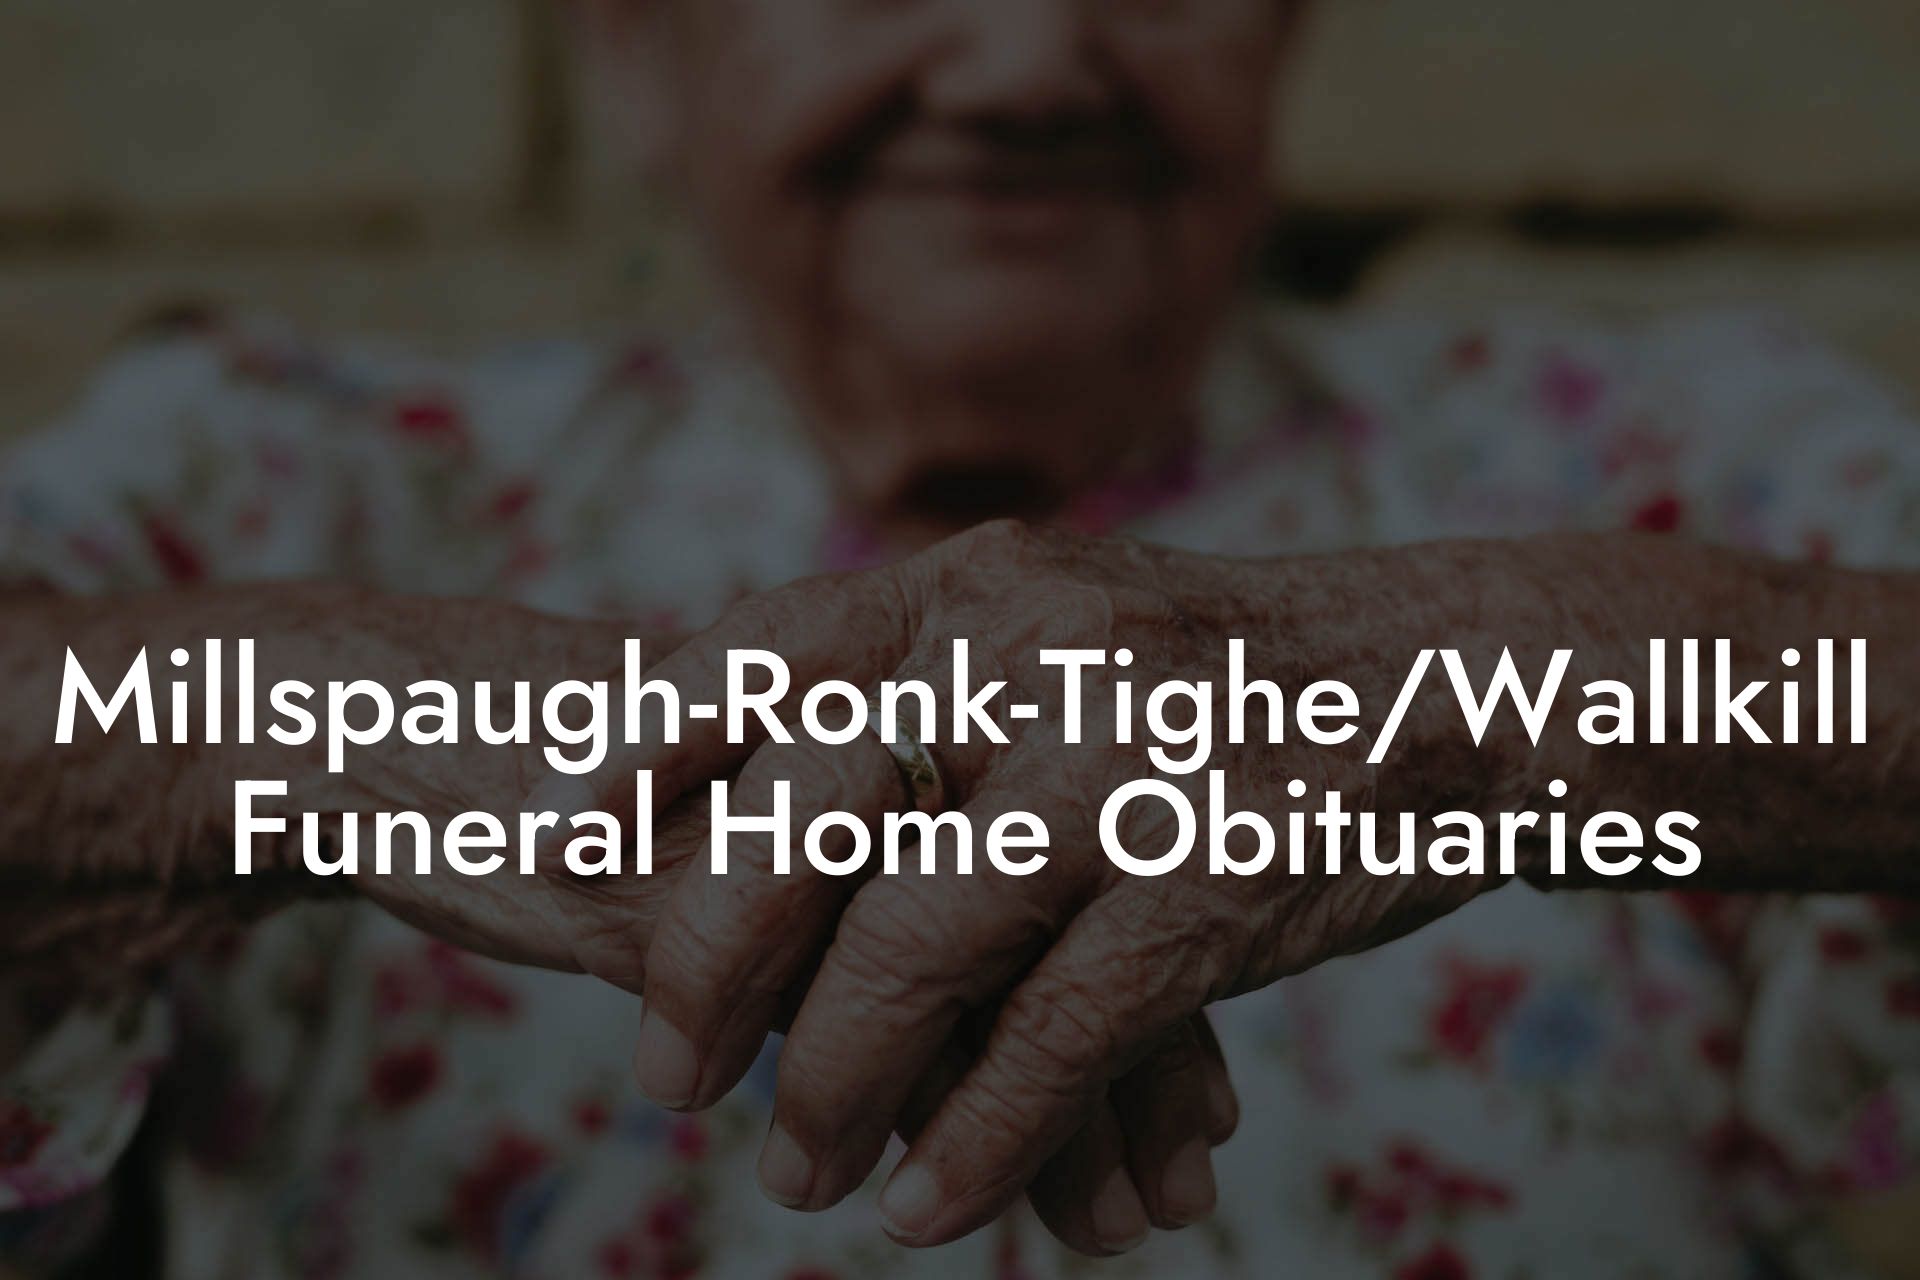 Millspaugh-Ronk-Tighe/Wallkill Funeral Home Obituaries